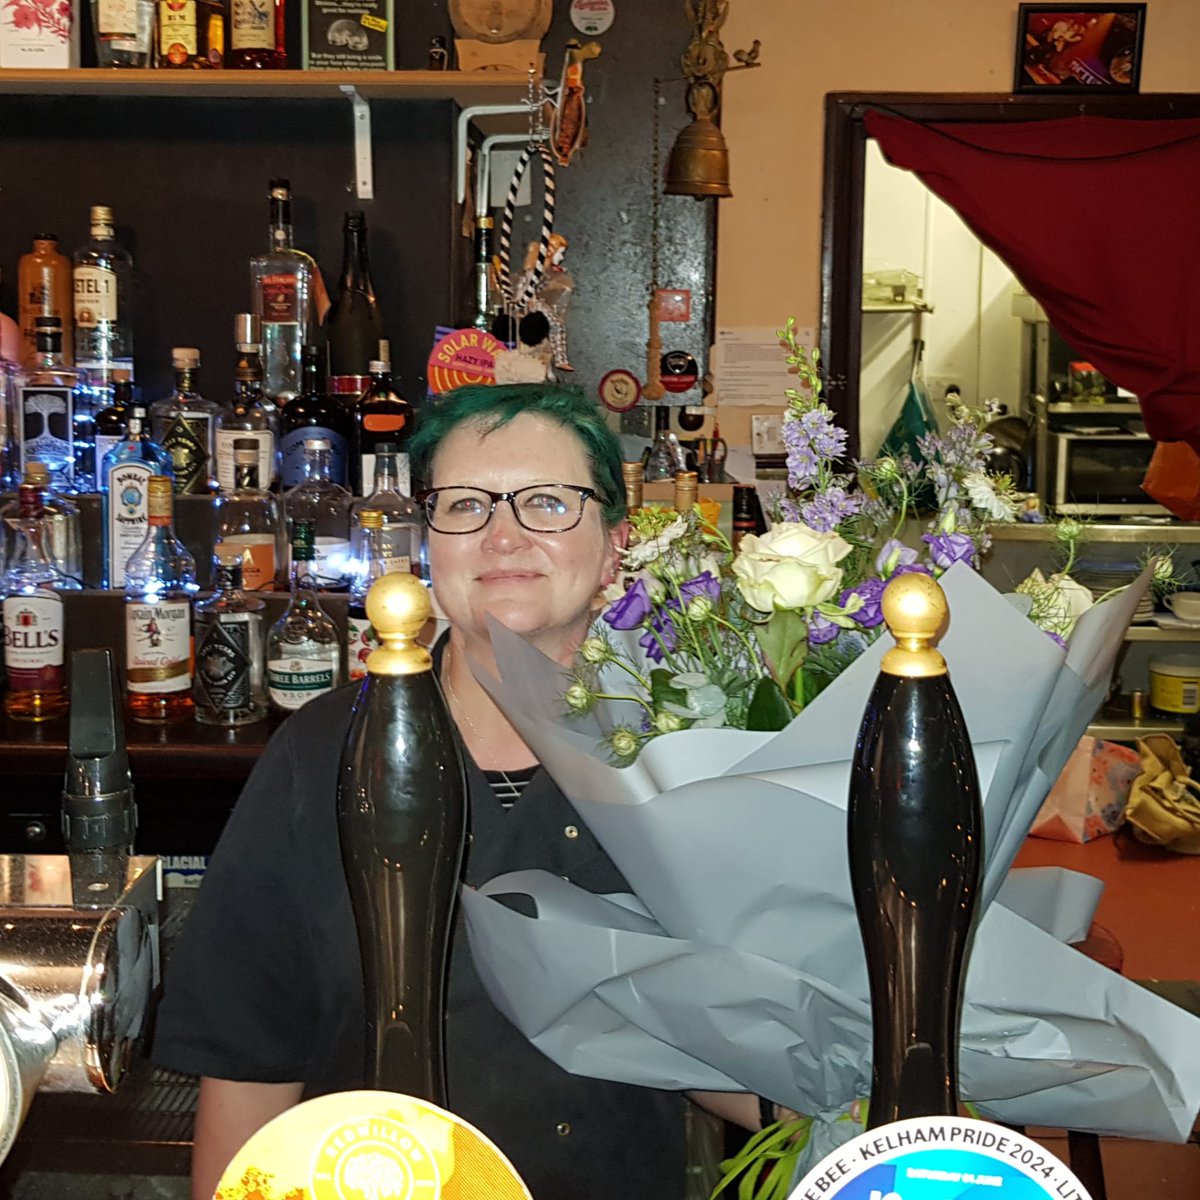 Sheffield GC Network has a lot to thank this woman for. @harlequinpub has been our natural home since our inception, but move on to pastures new we must. We wish the wonderful landlady all the very best in her new ventures, researching all things cutlery. Keeping it Sheffield!